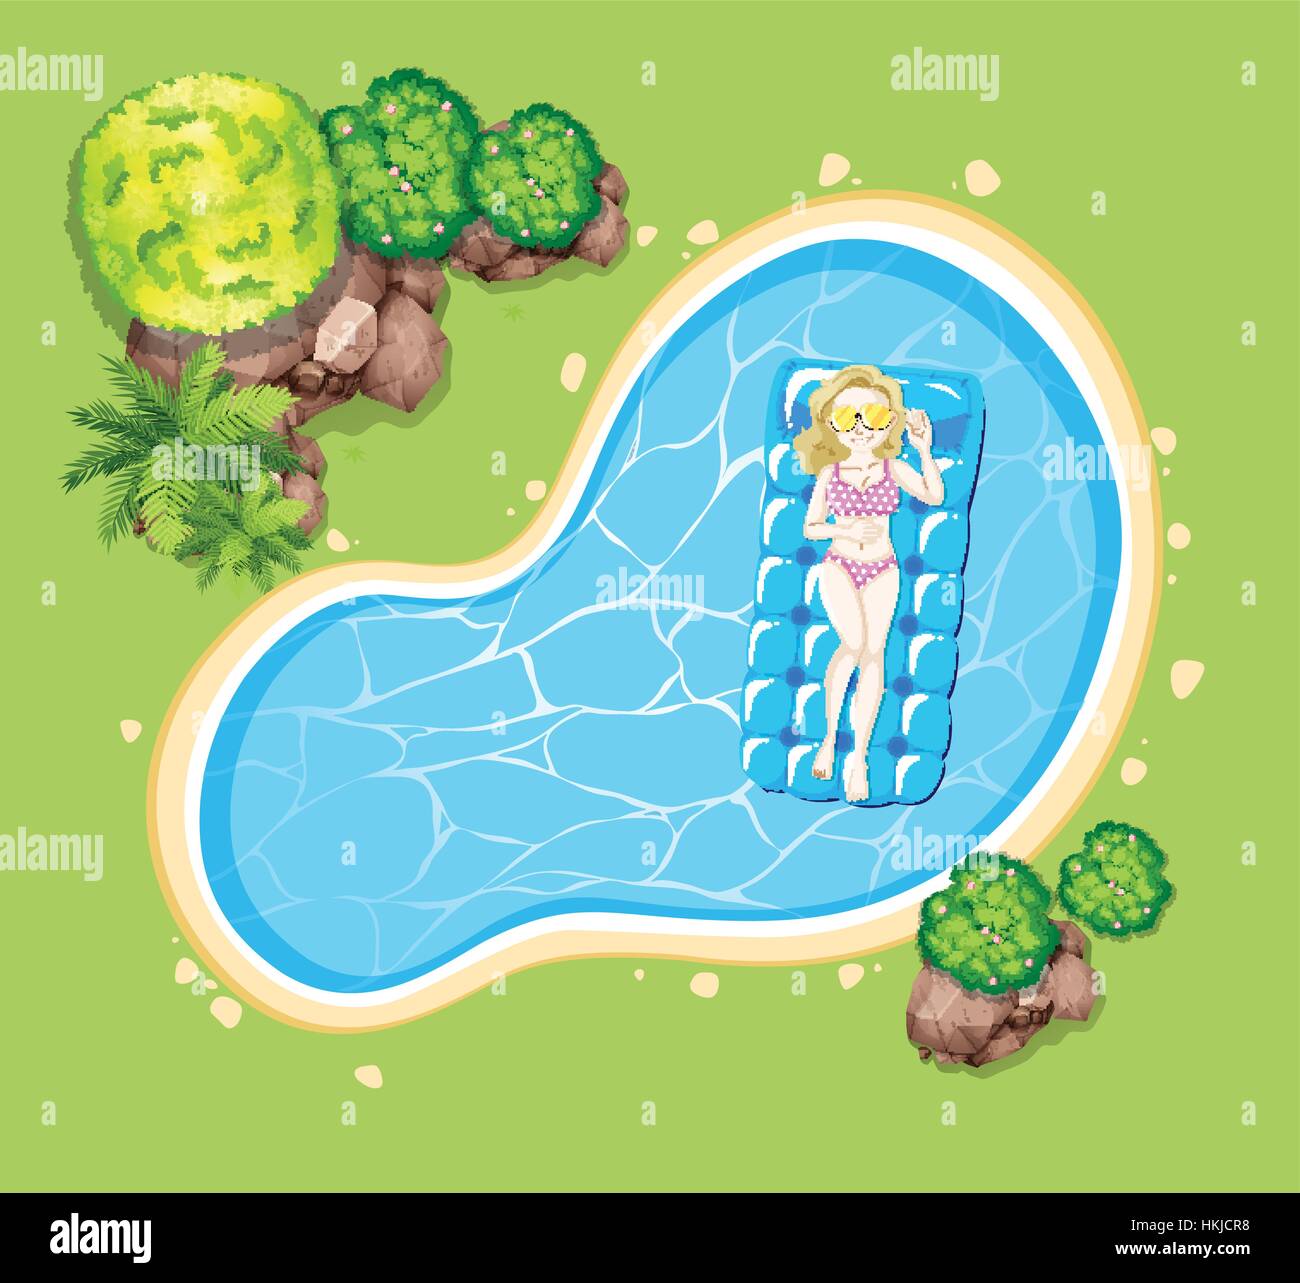 Woman on floating raft in the pool illustration Stock Vector